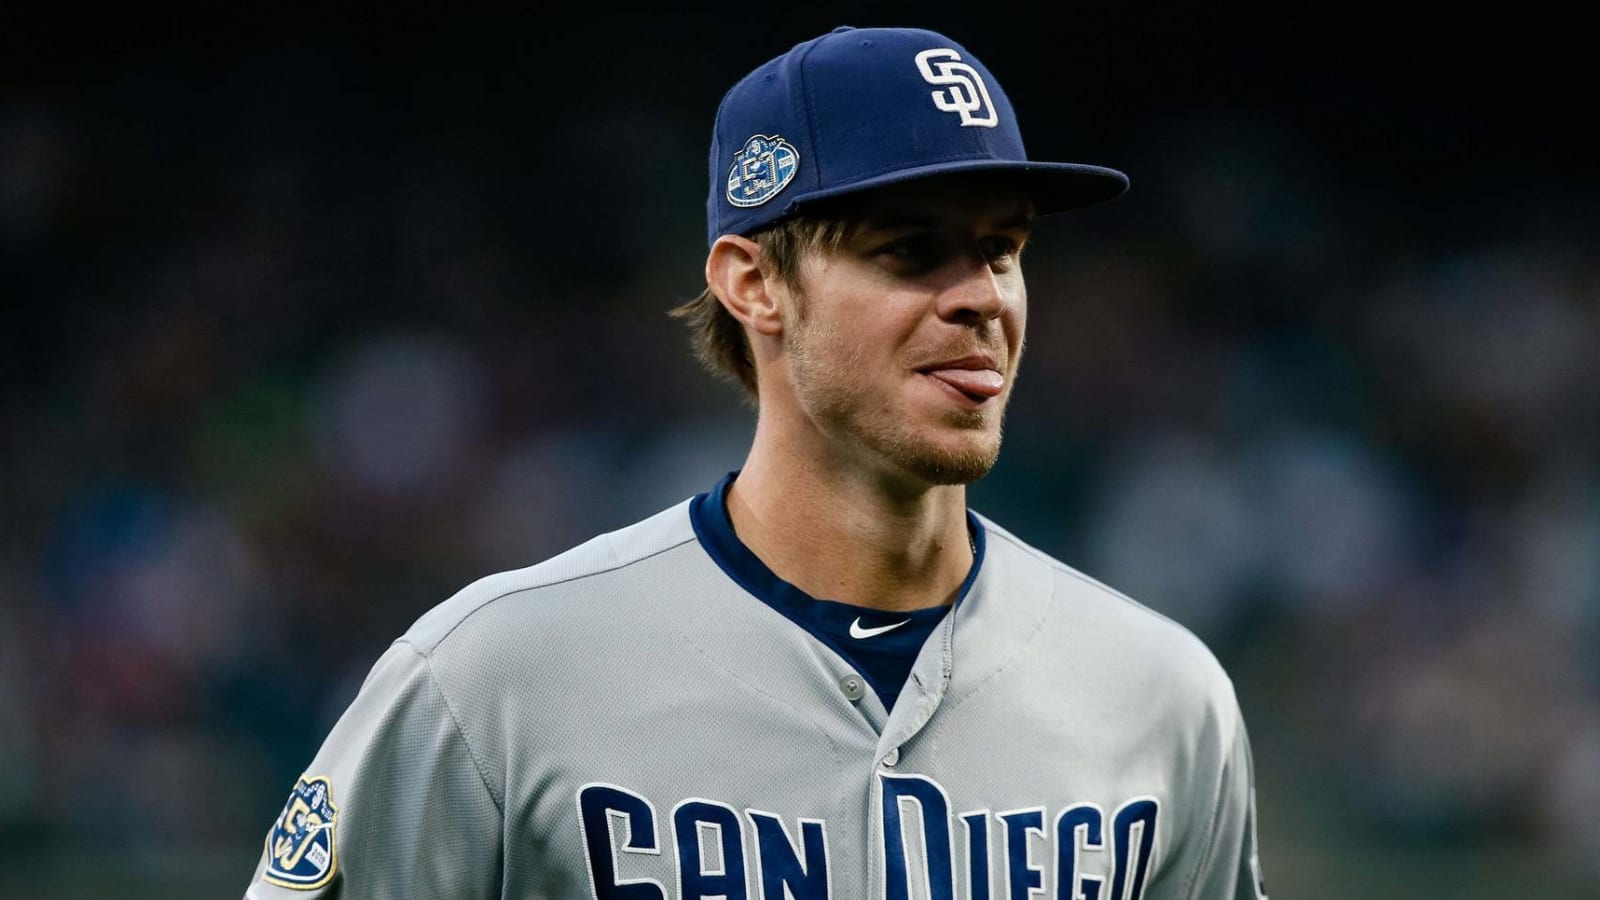 Wil Myers on potential trade away from the Padres: 'It is what it is'